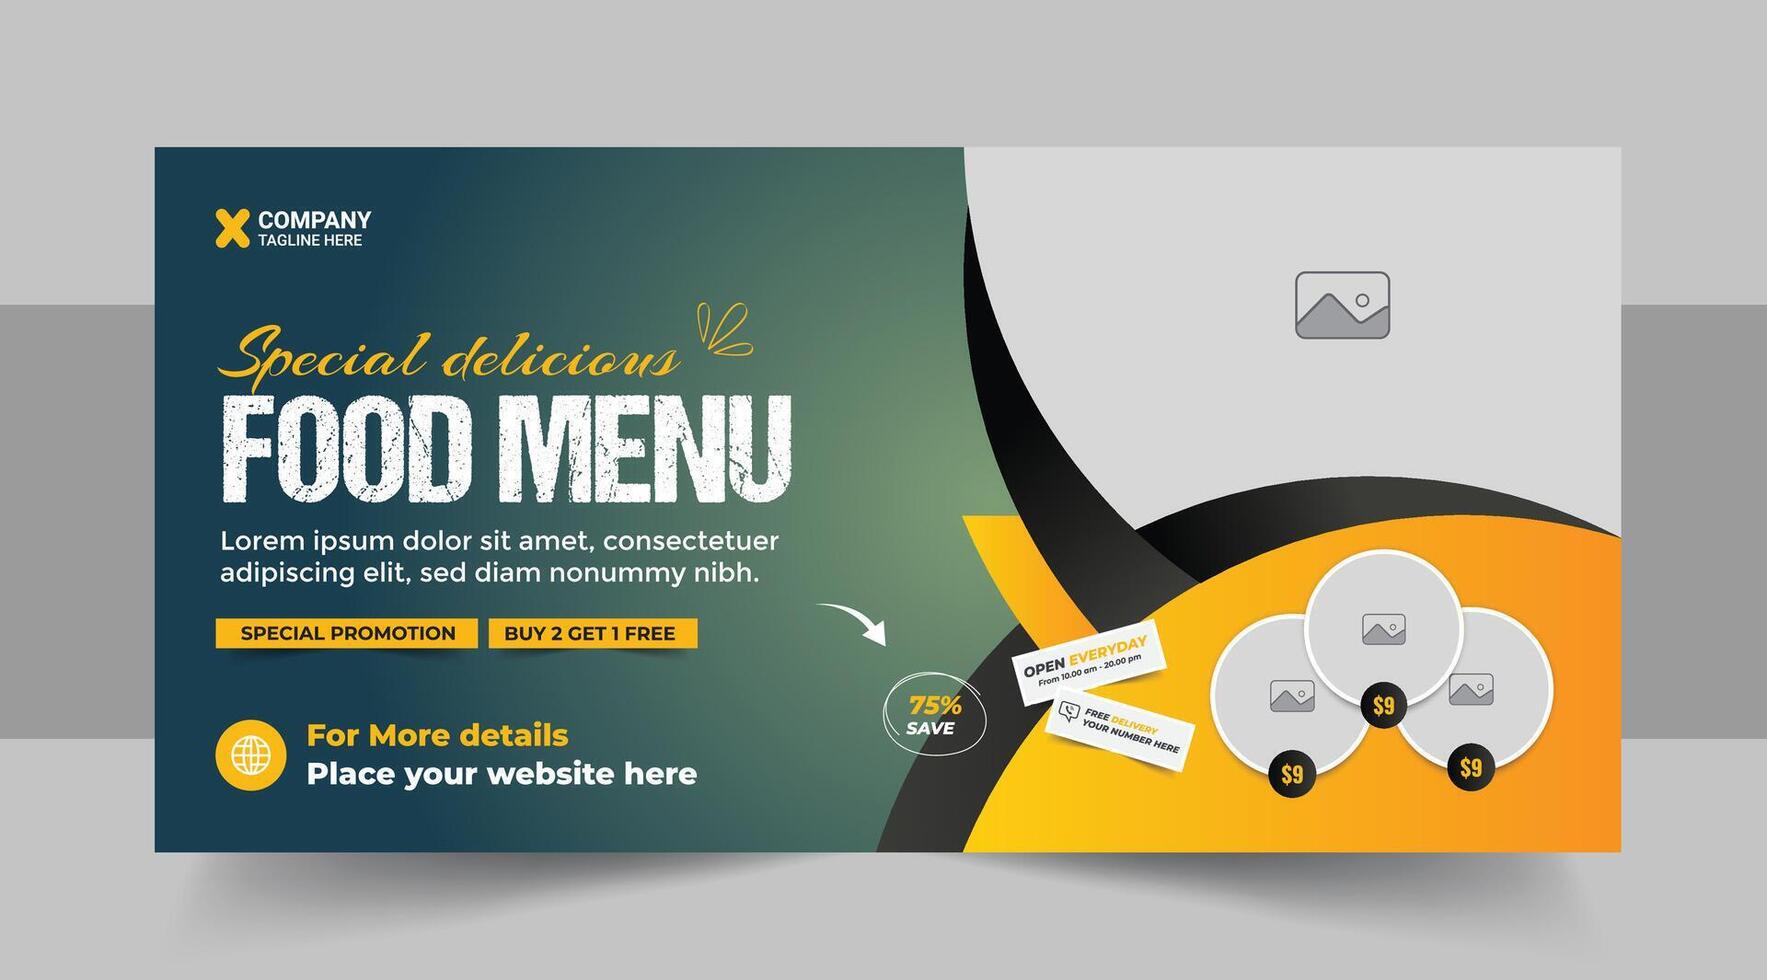 Restaurant food menu social media marketing web banner design. Pizza, burger or hamburger online sale promotion video thumbnail. Fast food website background. Food flyer with logo and business icon vector